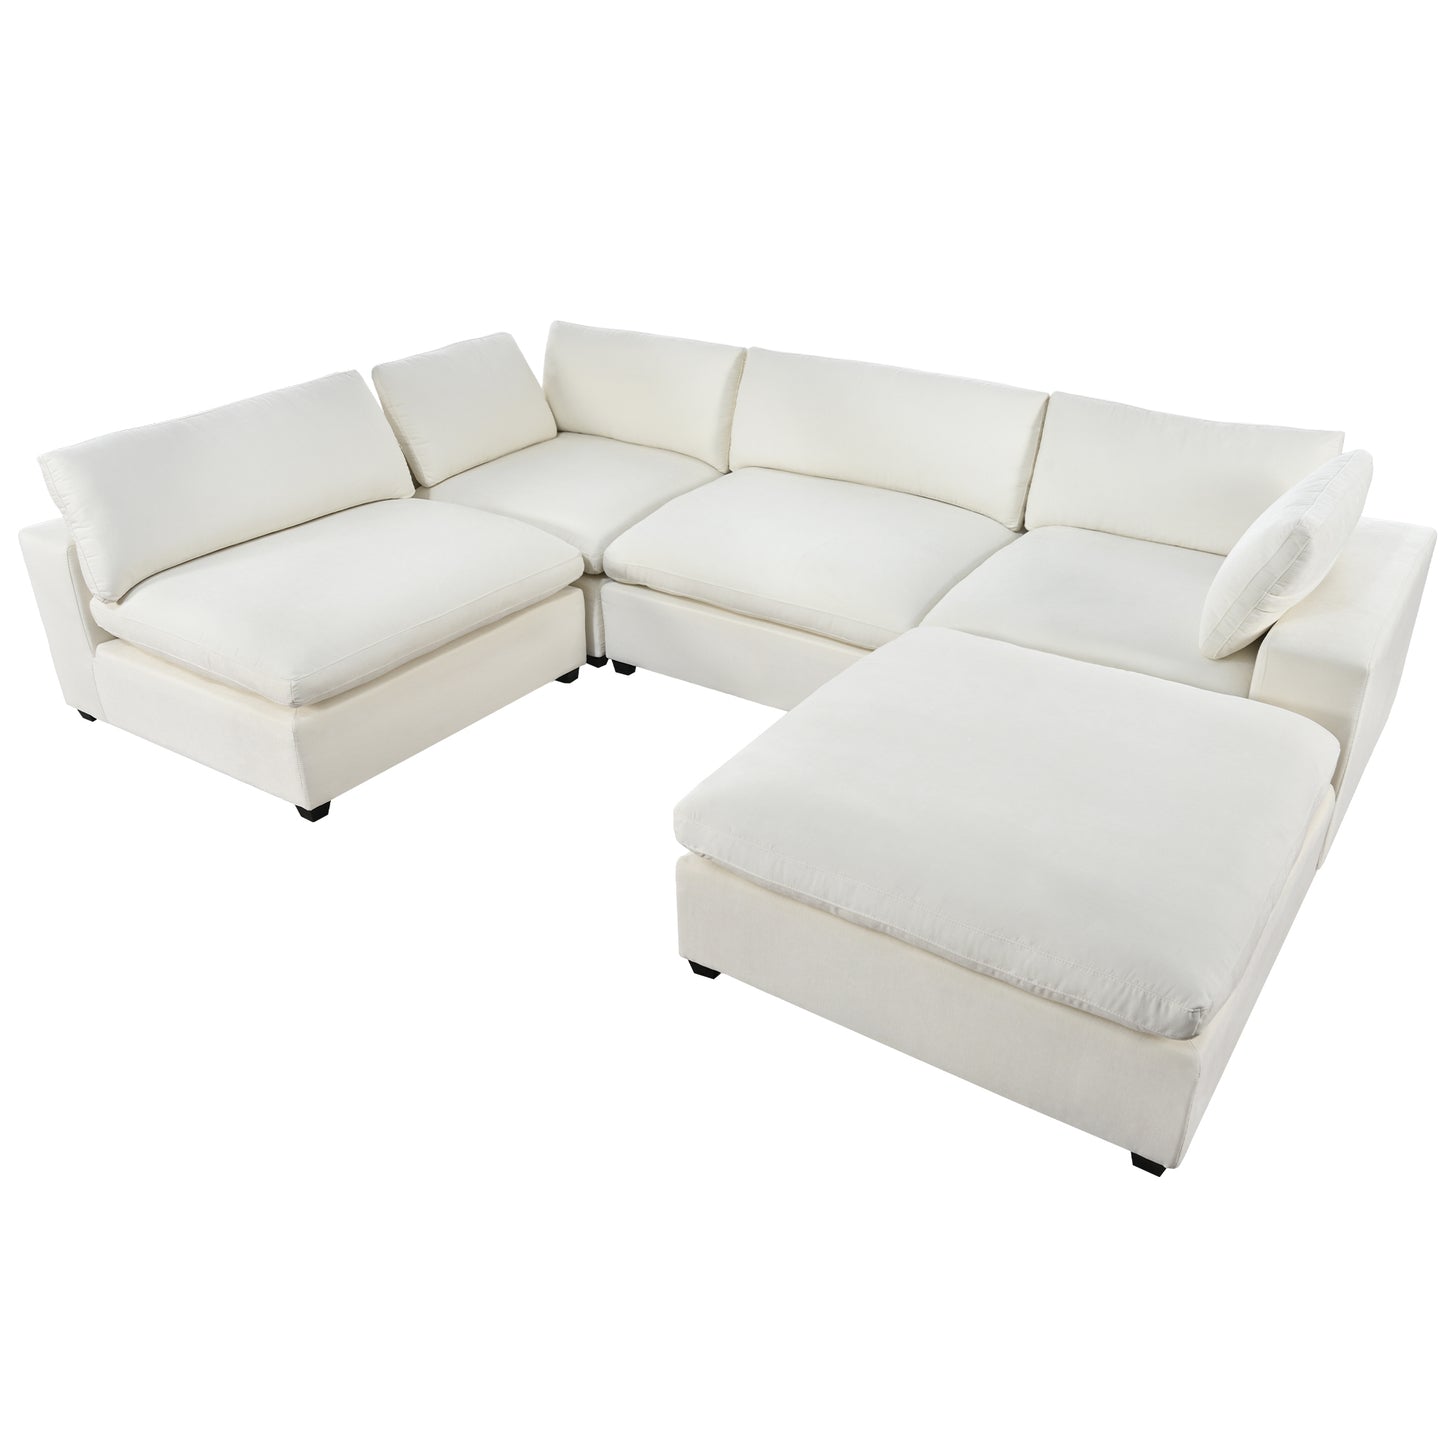 Summit Navy Modular Sectional - 5 Seat L-Configuration